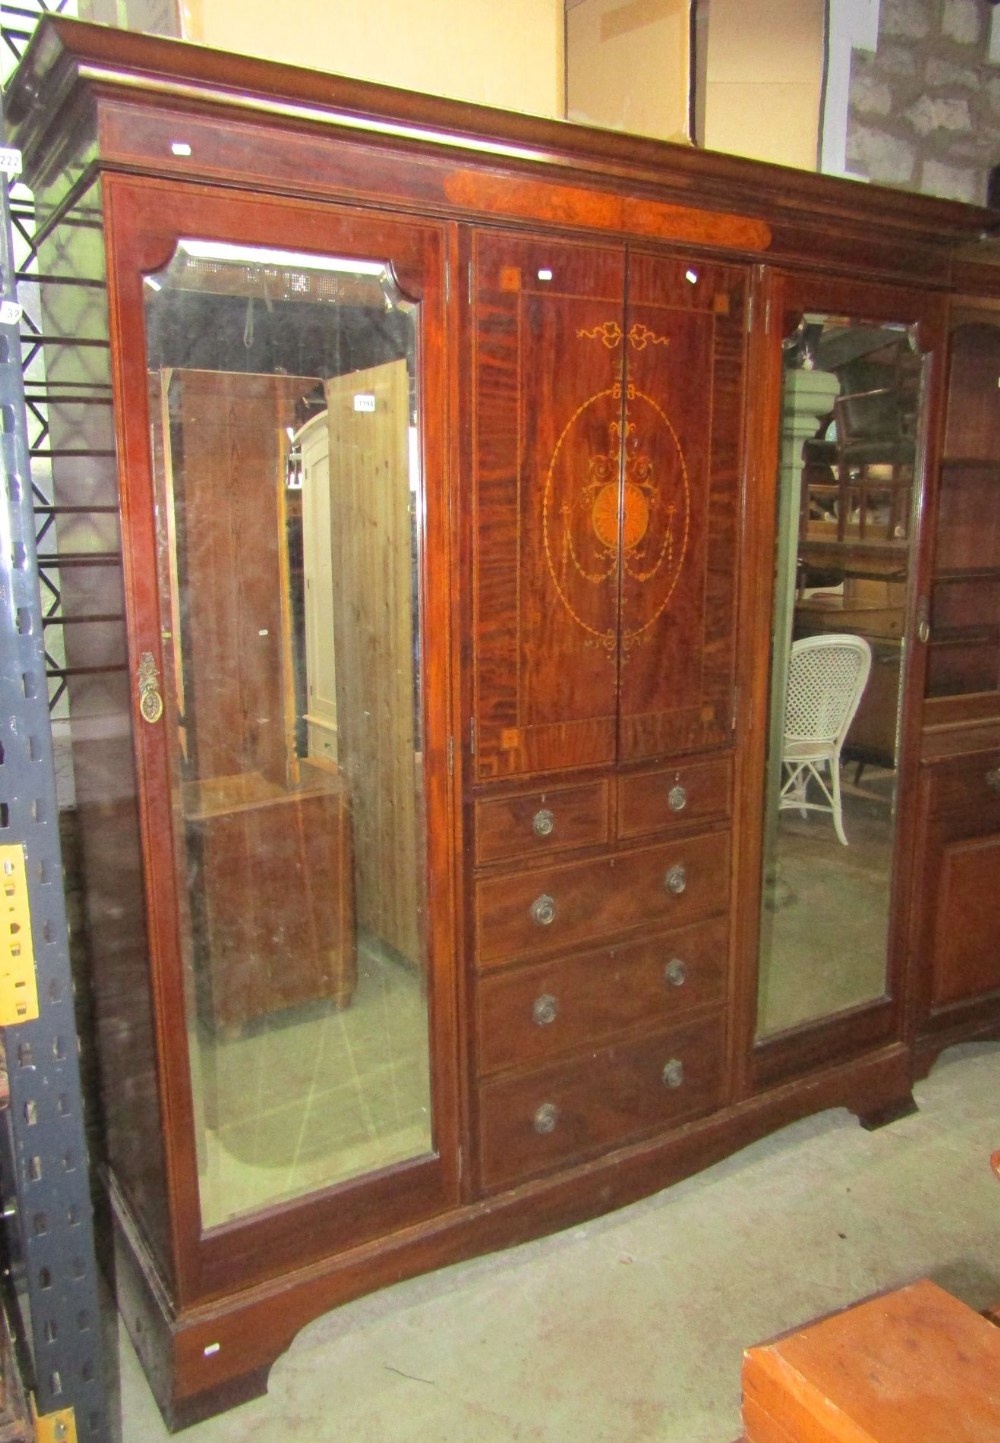 A good quality inlaid Edwardian mahogany triple compactum wardrobe, the central section enclosed